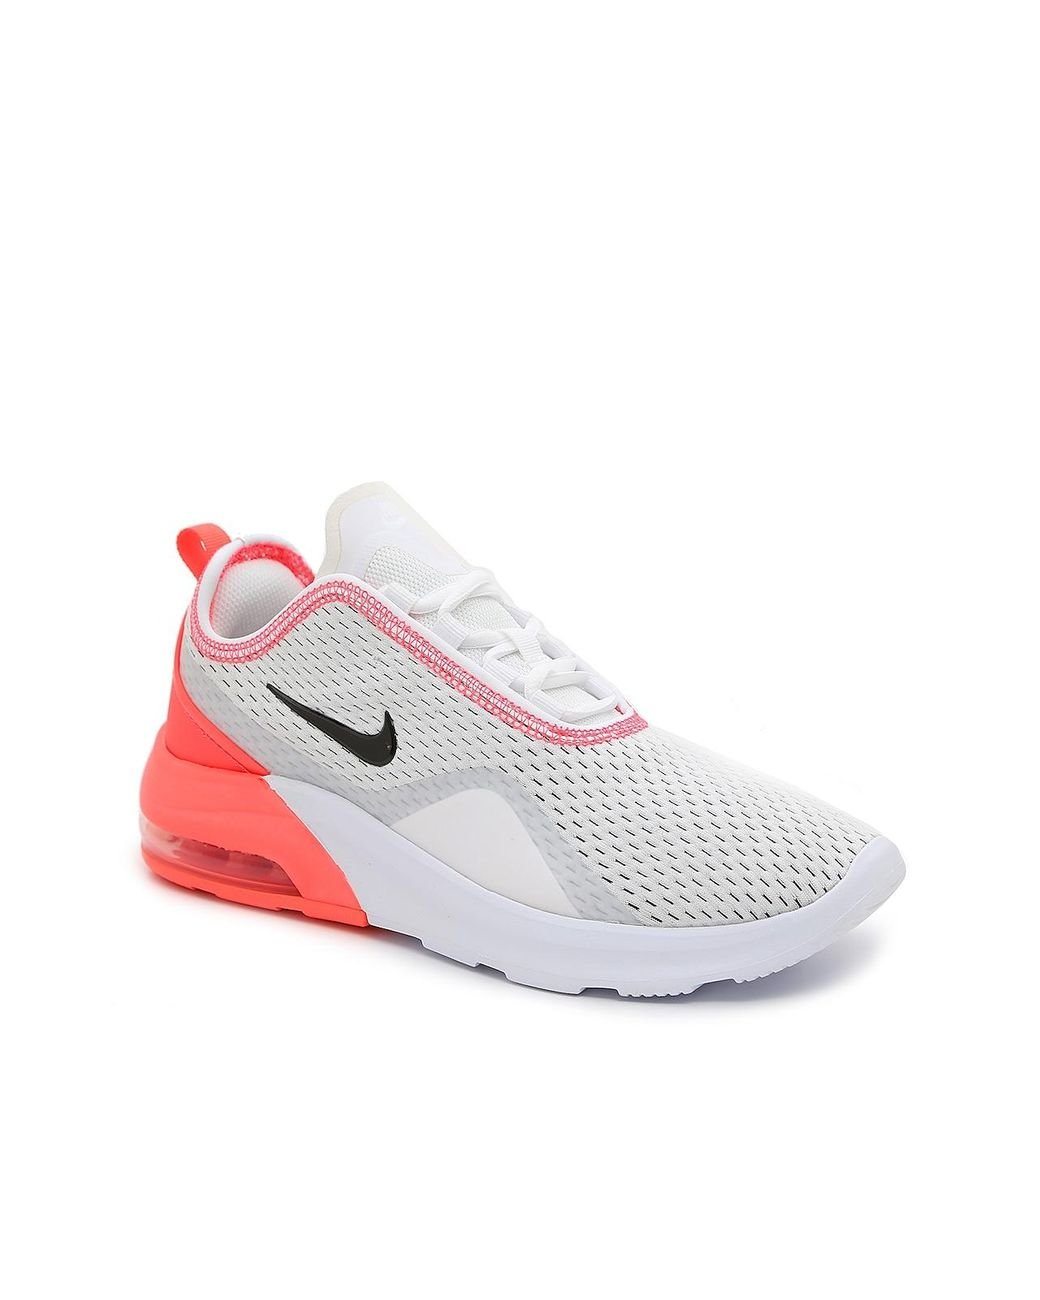 Nike Synthetic Air Max Motion 2 Sneaker in White/Orange (White) | Lyst